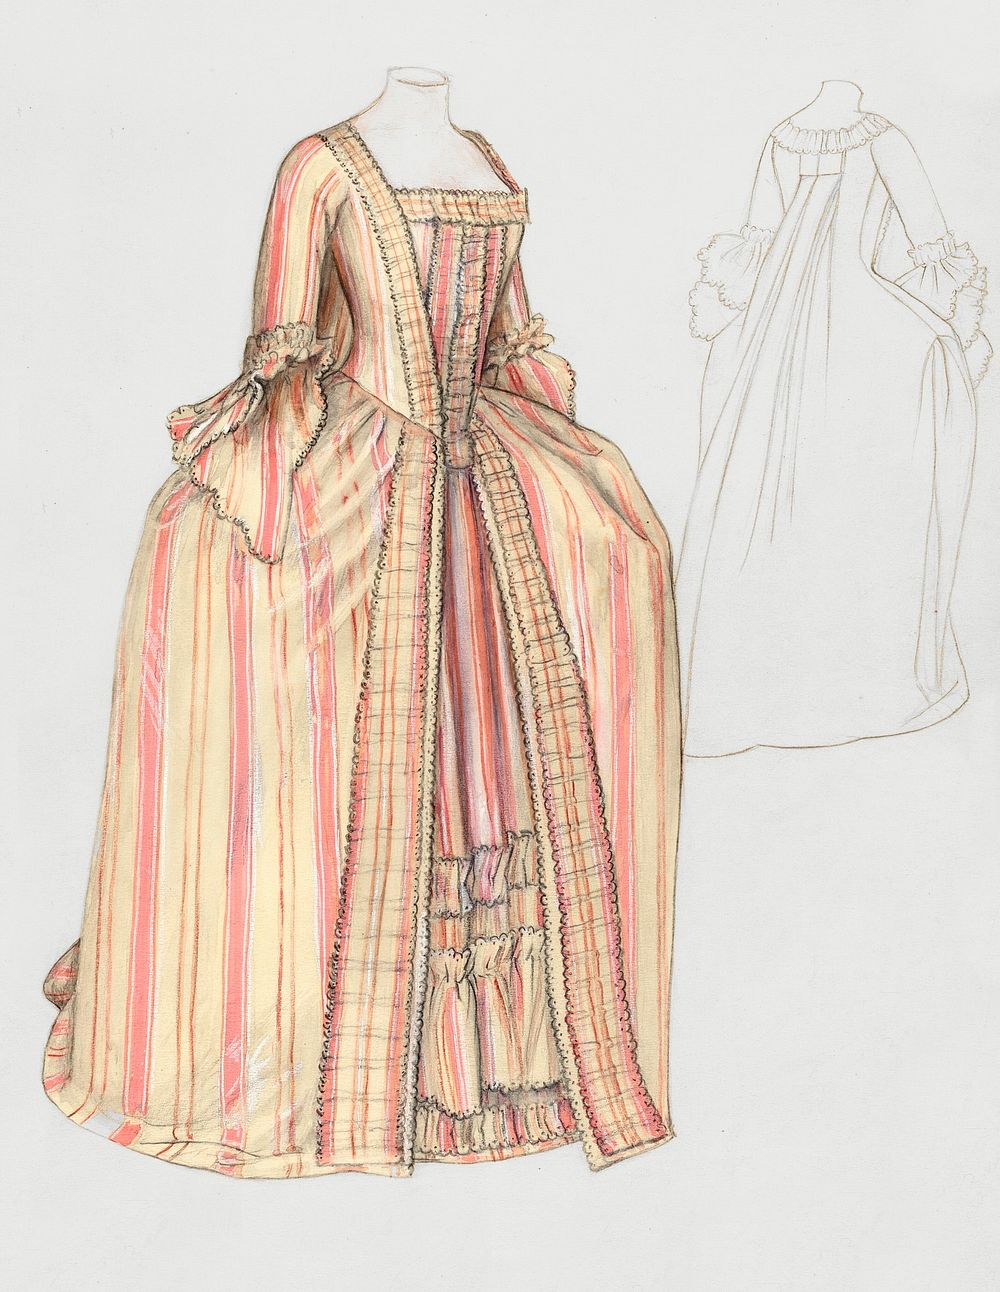 Dress (1935/1942) by Jean Peszel. Original from The National Gallery of Art. Digitally enhanced by rawpixel.